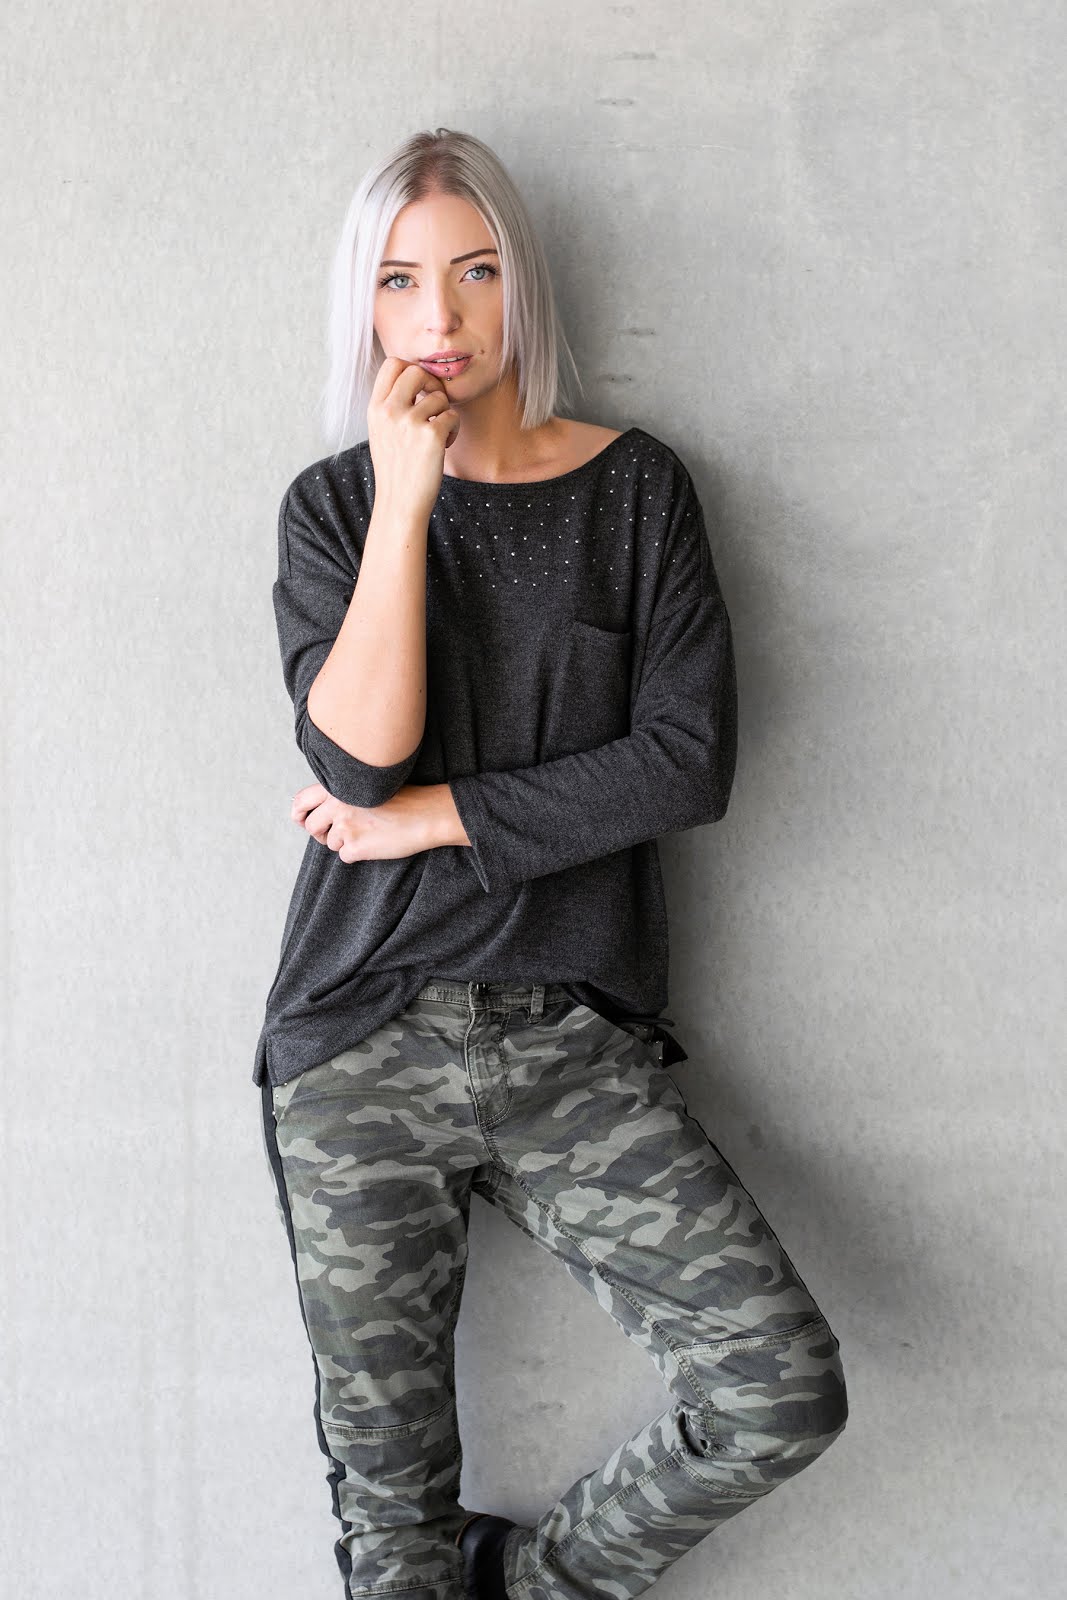 S.Oliver, camo, camouflage trousers, army, outfit, minimal, combat boots, fashion, trend 2018 fall winter